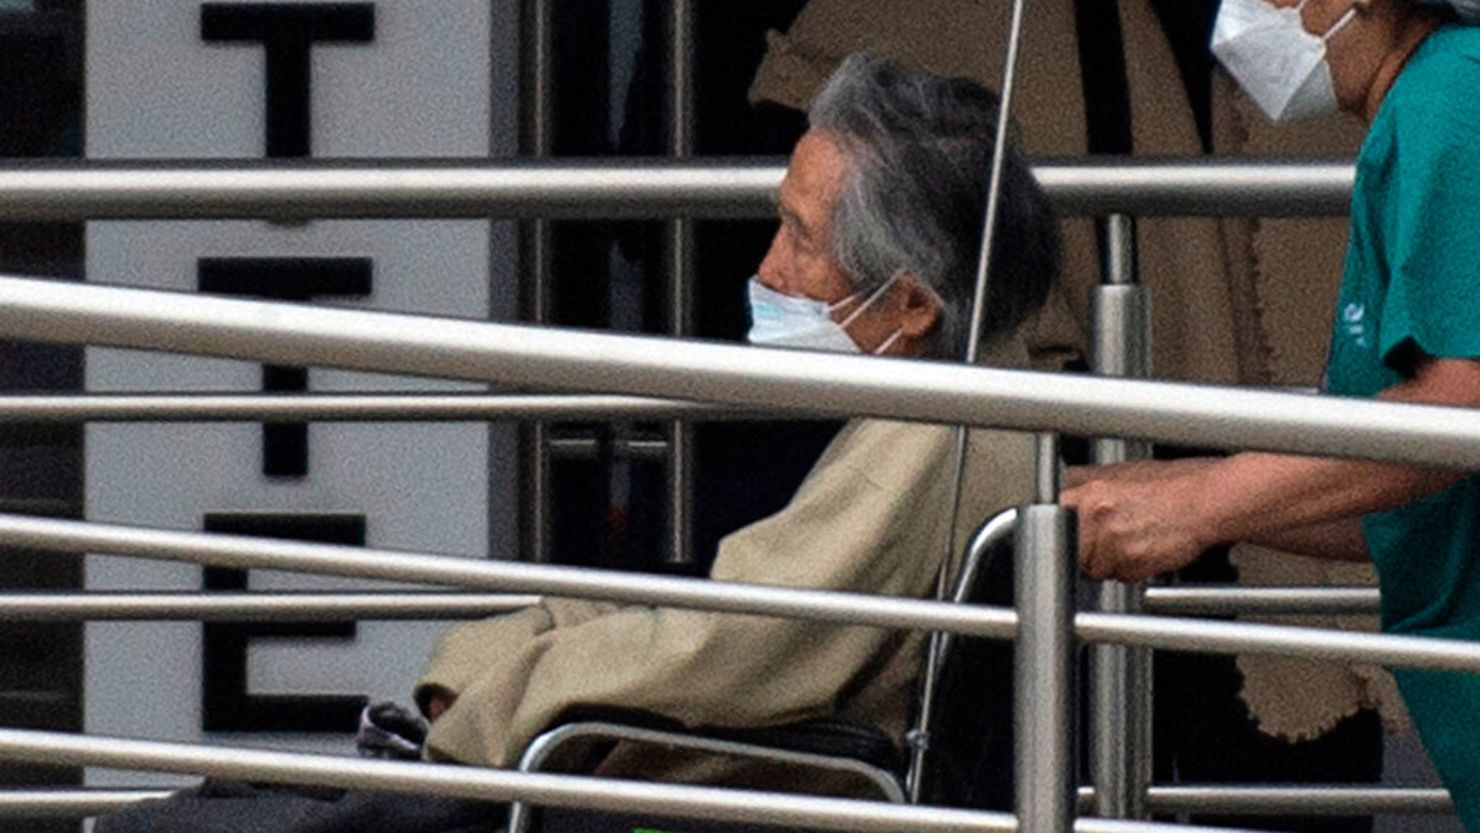 Peruvian former president (1990-2000) Alberto Fujimori arrives to a private clinic in Lima, on October 4, 2021. - The health of former Peruvian president (1990-2000) Alberto Fujimori, who was admitted to hospital last week, deteriorated in the last hours and he will undergo a heart intervention, his family doctor Alejandro Aguinaga informed AFP on October 4, 2021. (Photo by ERNESTO BENAVIDES / AFP)